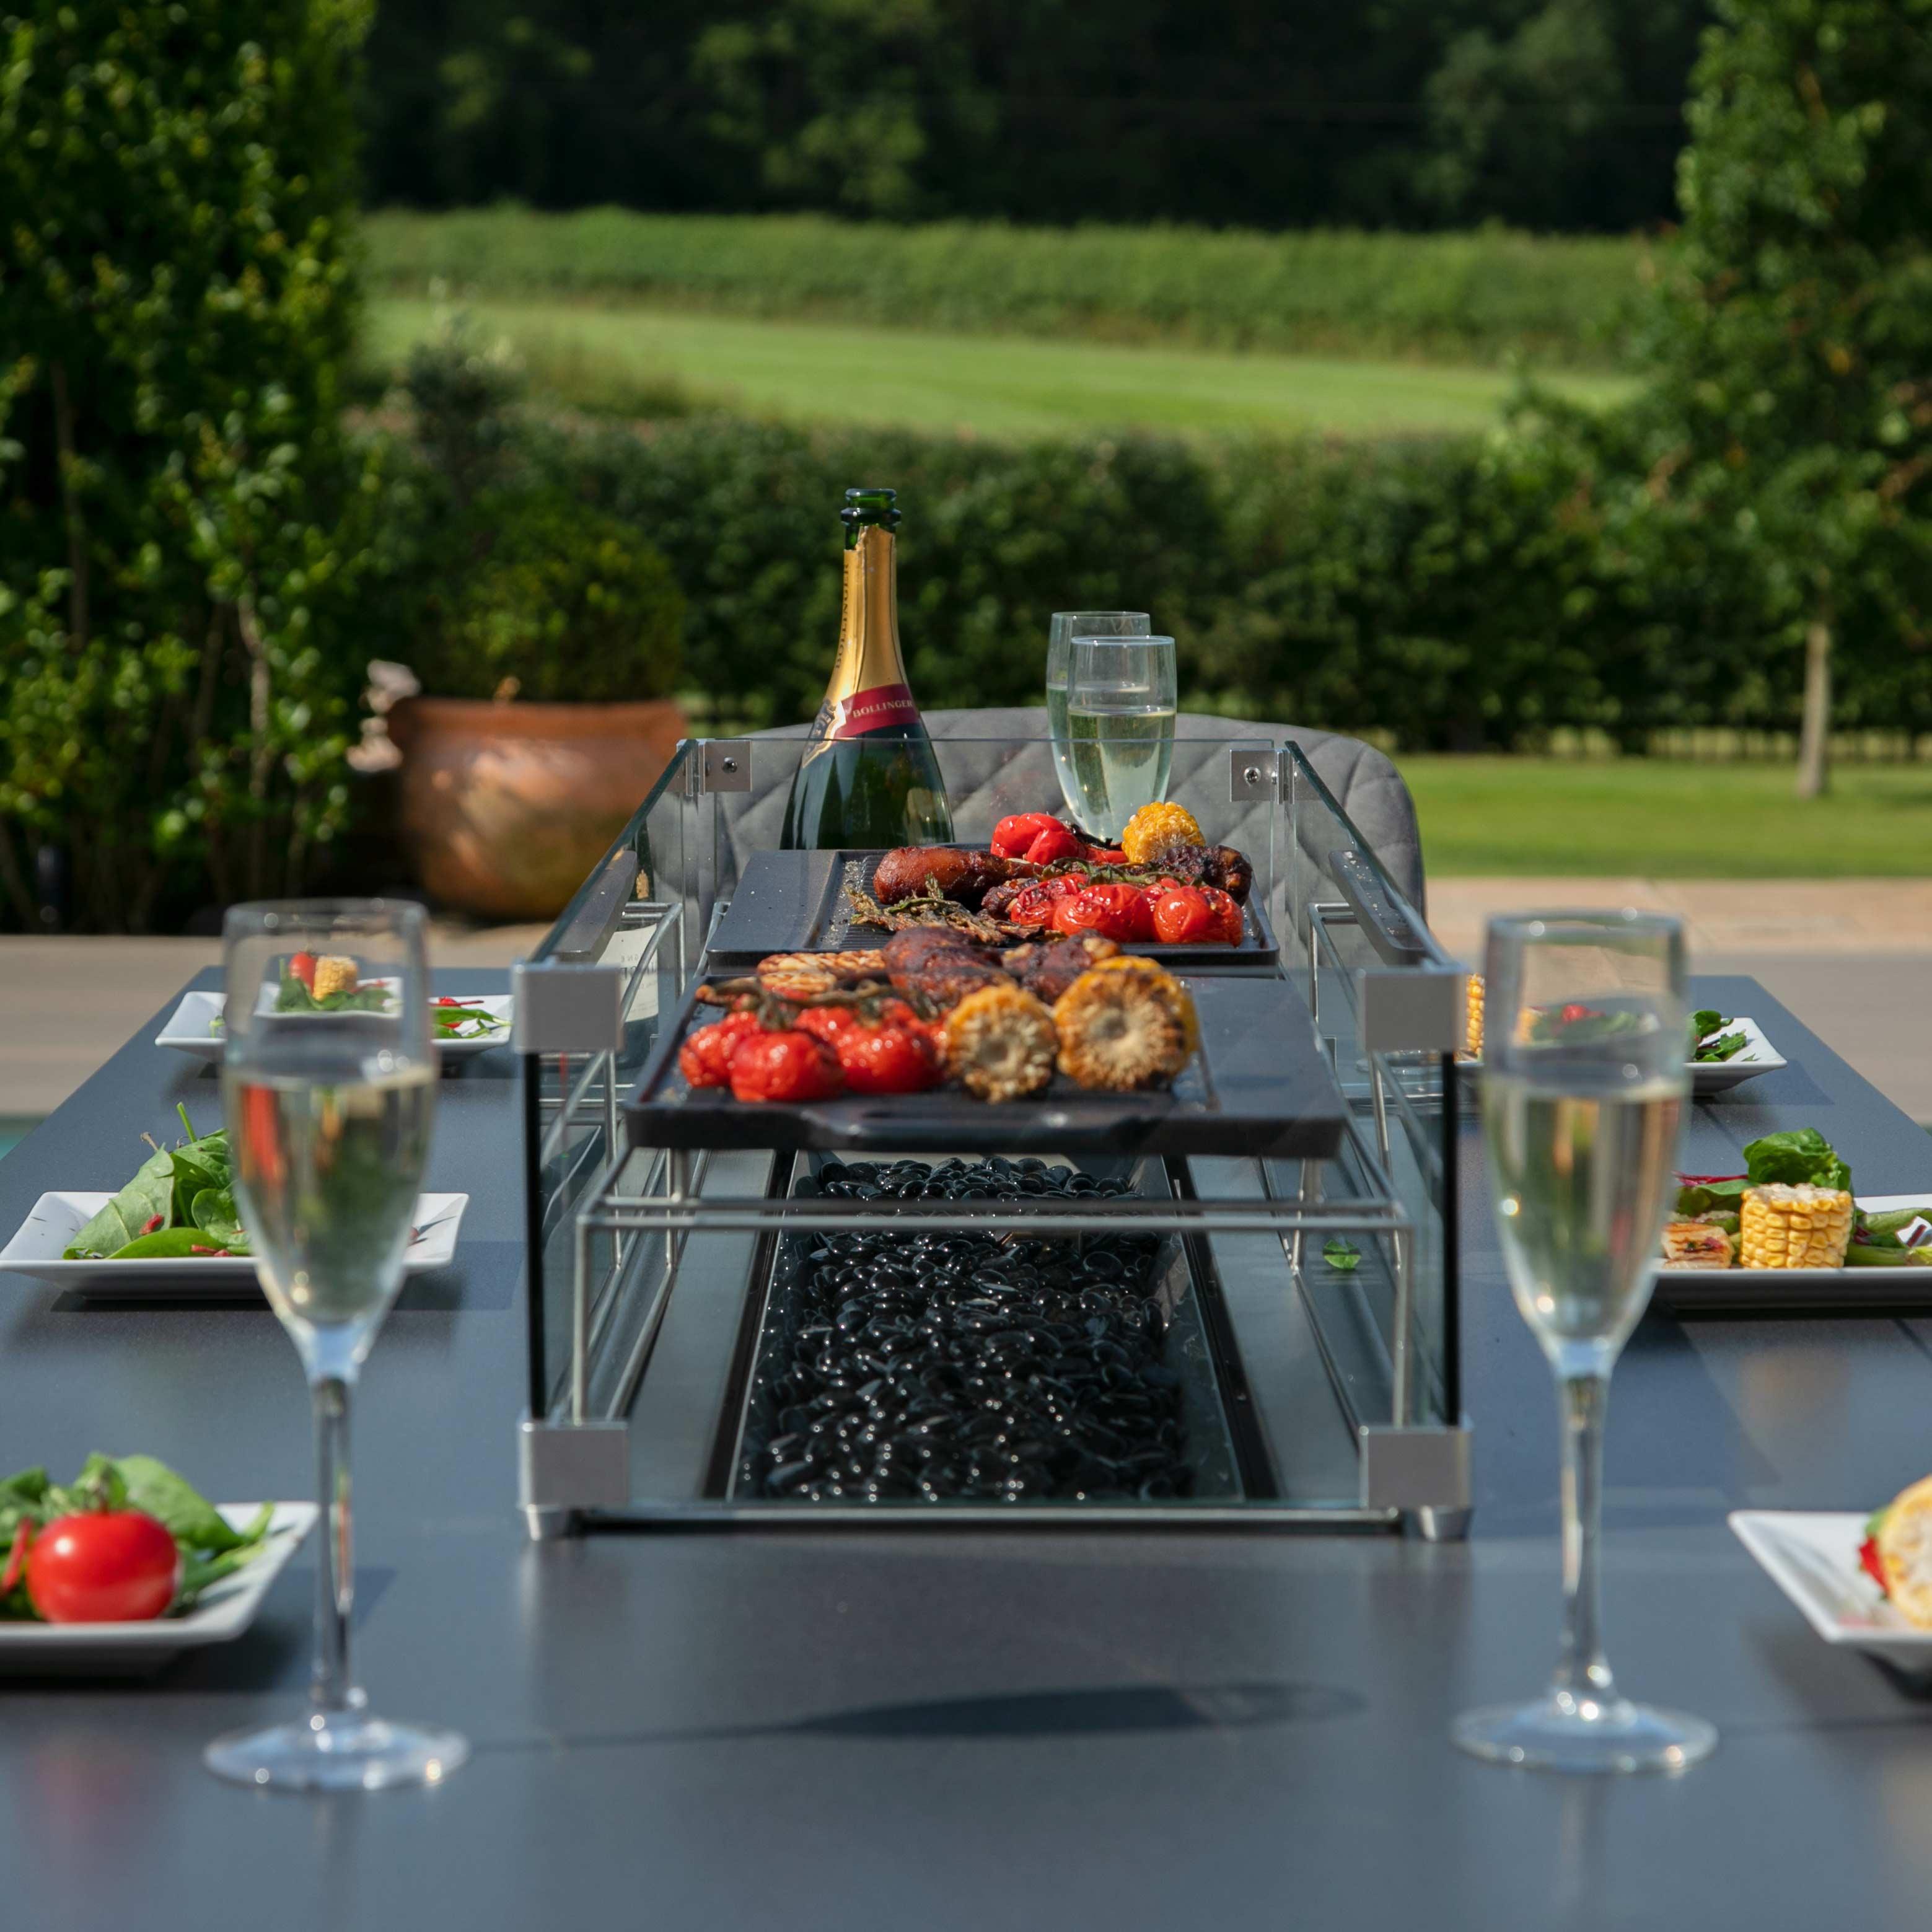 Dining set with Firepit in Use with Food